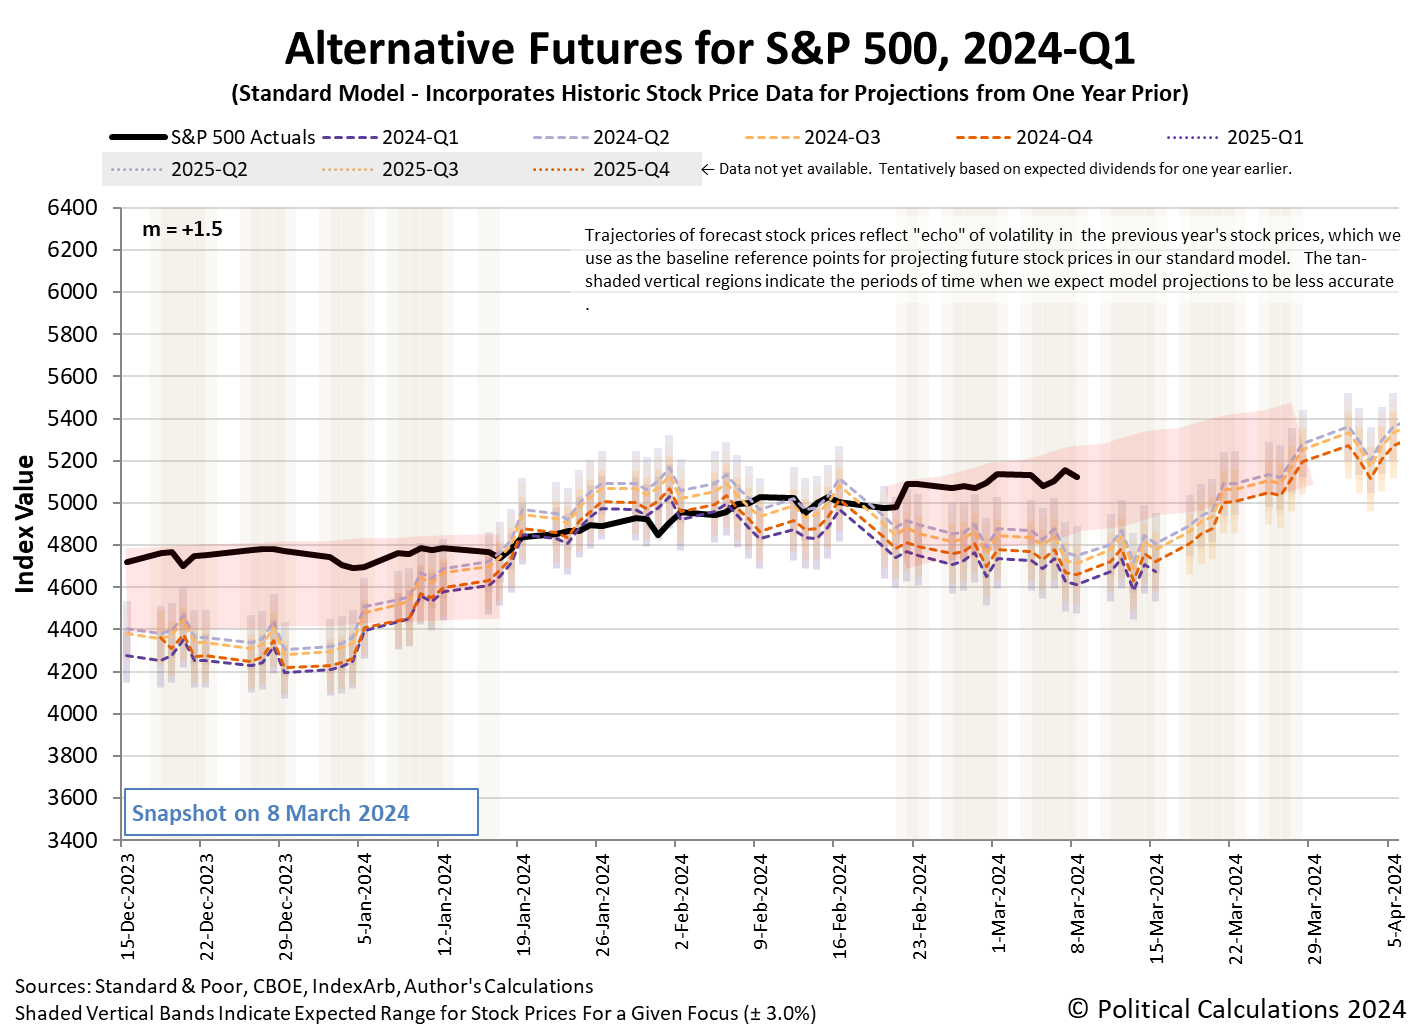 Alternative Futures - S&P 500 - 2024Q1 - Standard Model (m=+1.5 from 9 March 2023) - Snapshot on 8 Mar 2024